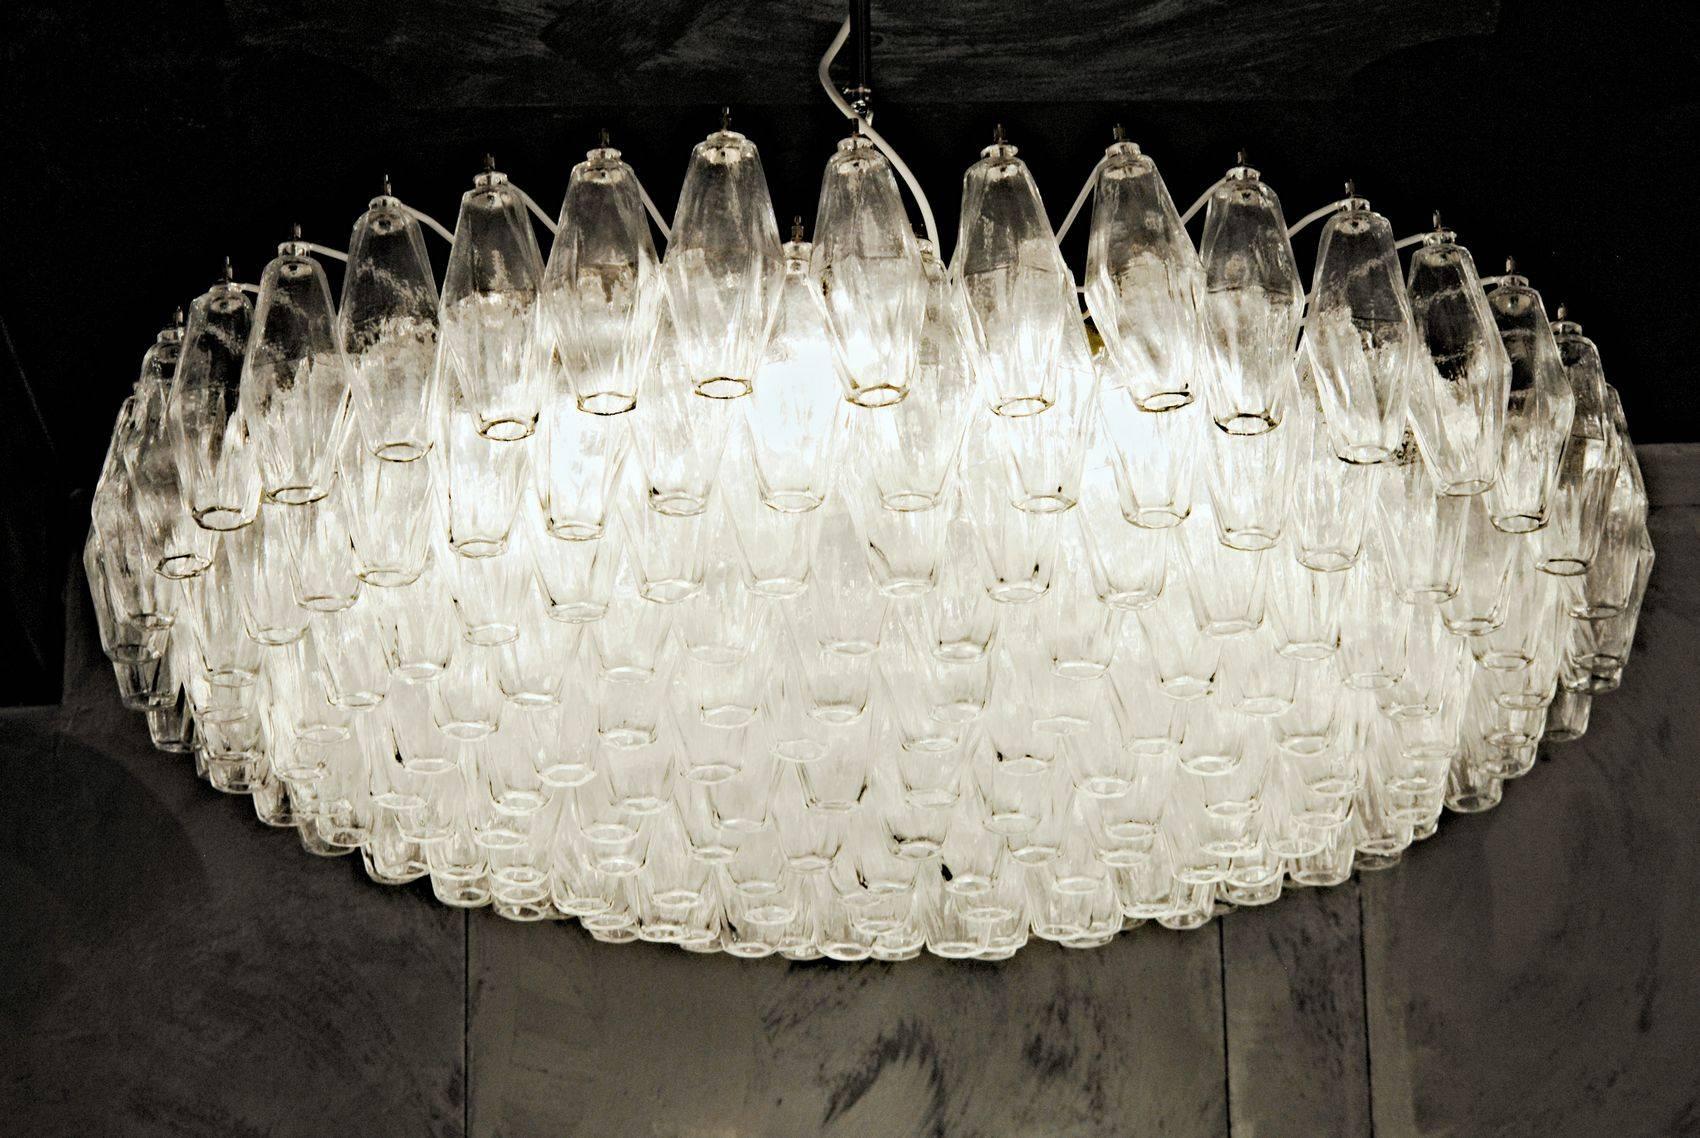 Sumptuous exemplary Mid-Century chandelier. For large a large hall, ballroom or public spaces. Would be stunning in a large midcentury living room or an eclectic home. This triedri chandelier is only in clear crystal glass, the two color combination